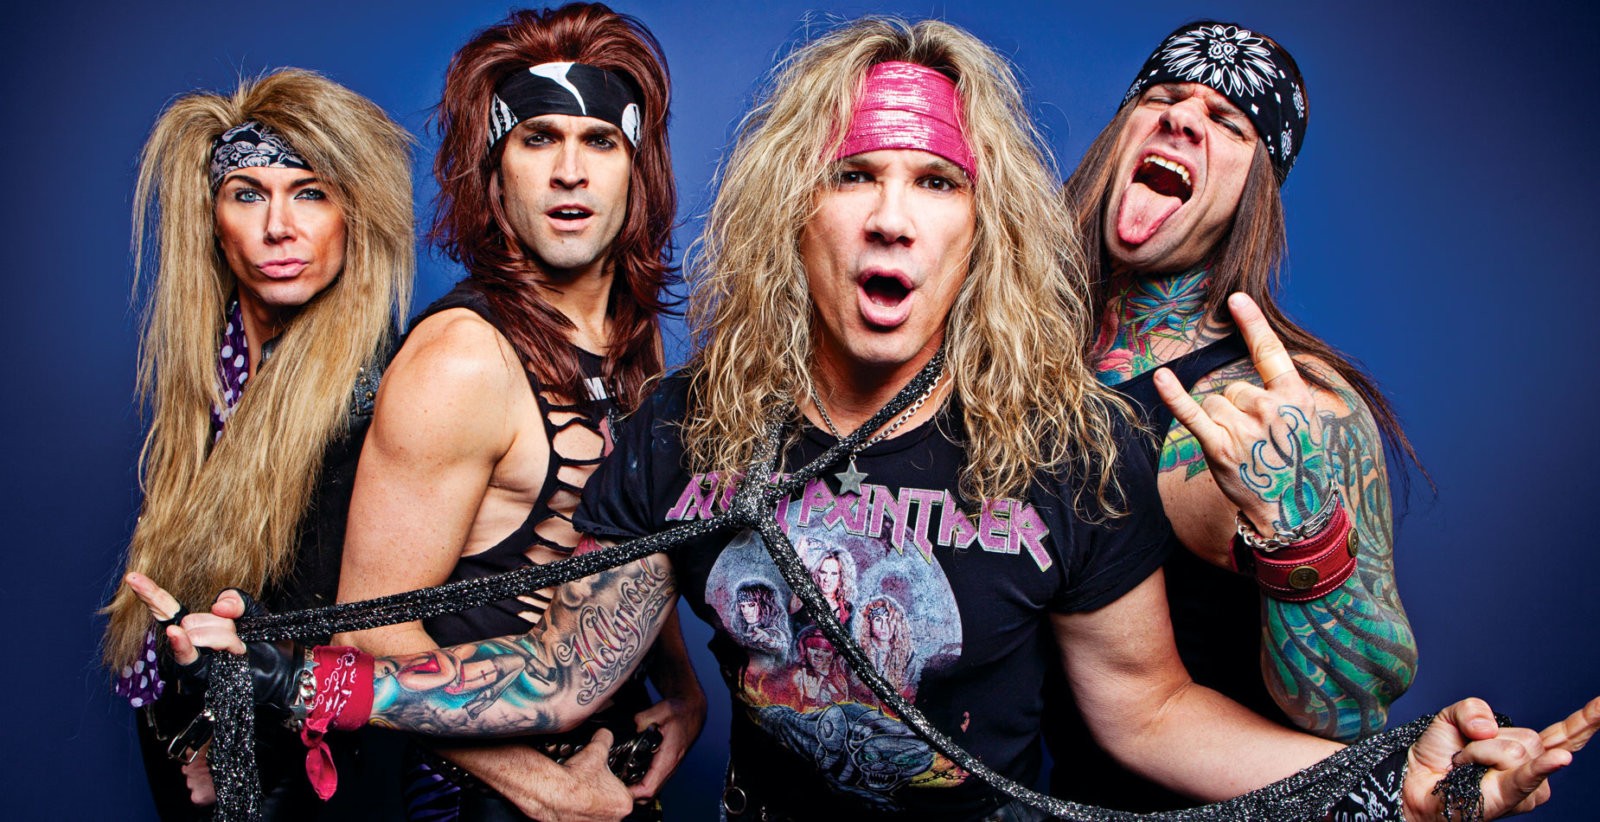 Steel Panther band